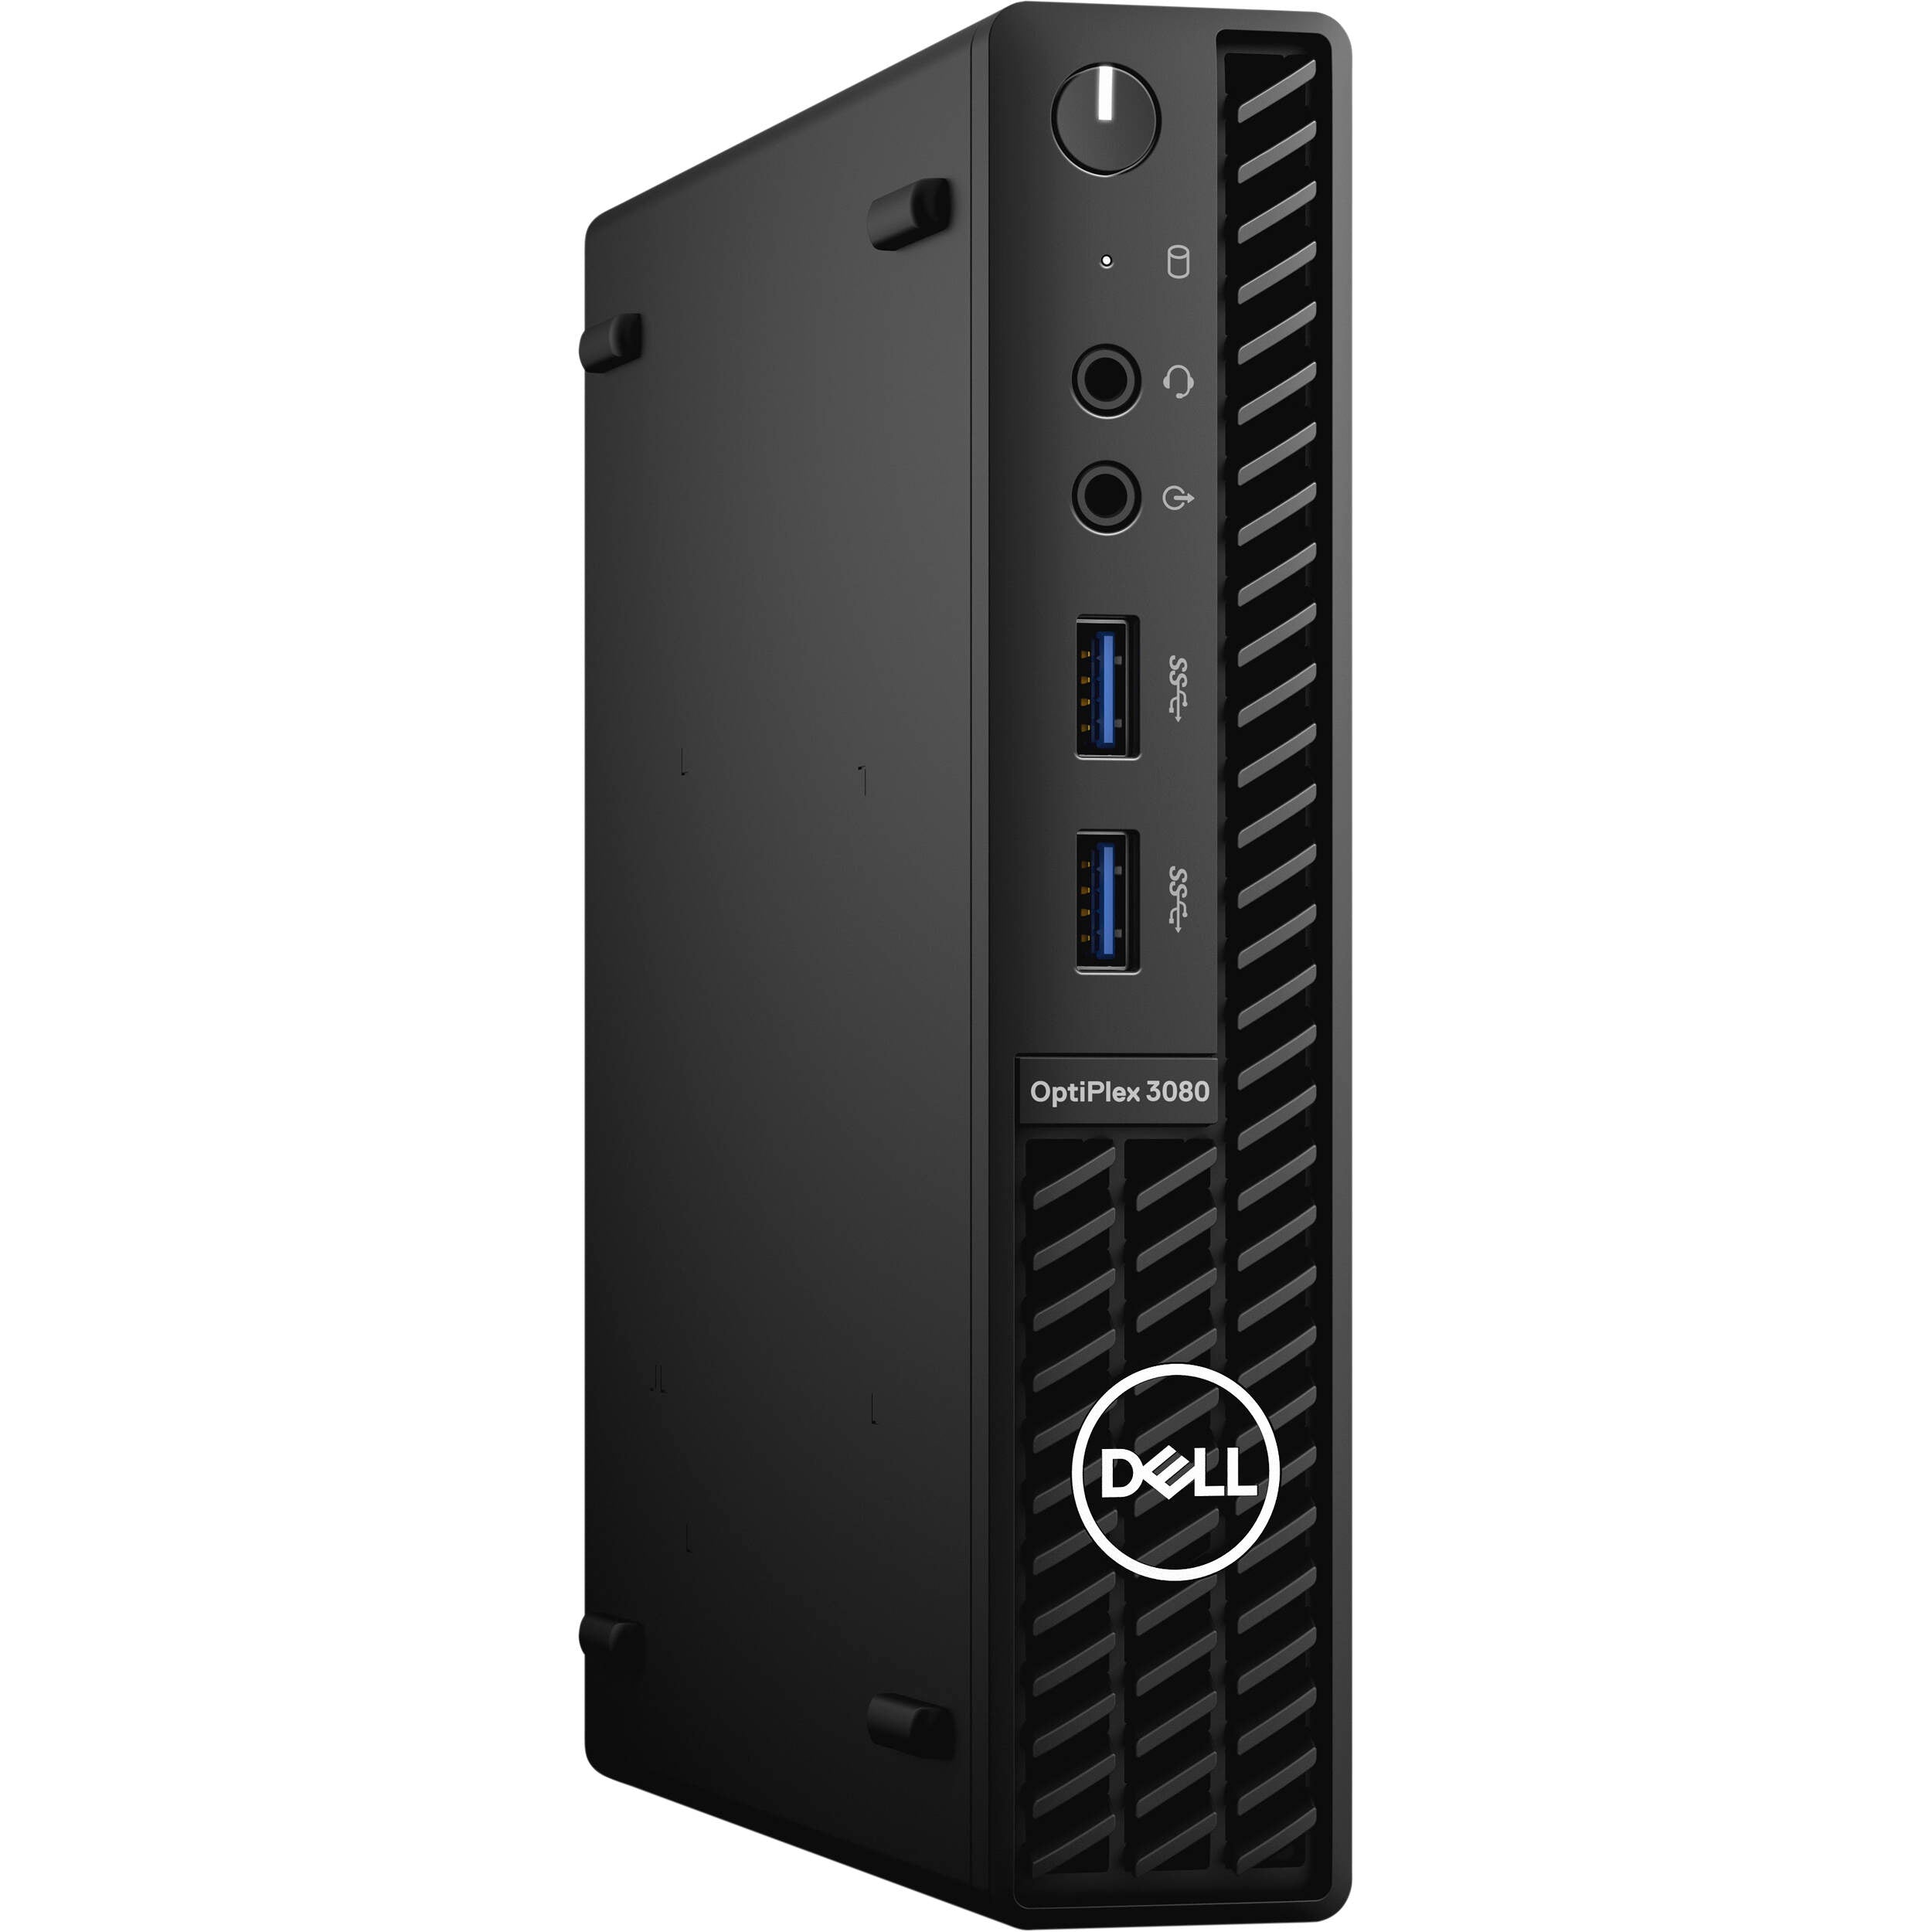 Dell GDR9W-R Intel Core i5 10th Gen 10500T 2.3GHz 8GB DDR4 RAM 256GB SSD Intel UHD Graphics 630 with Wired Keyboard - Certified Refurbished